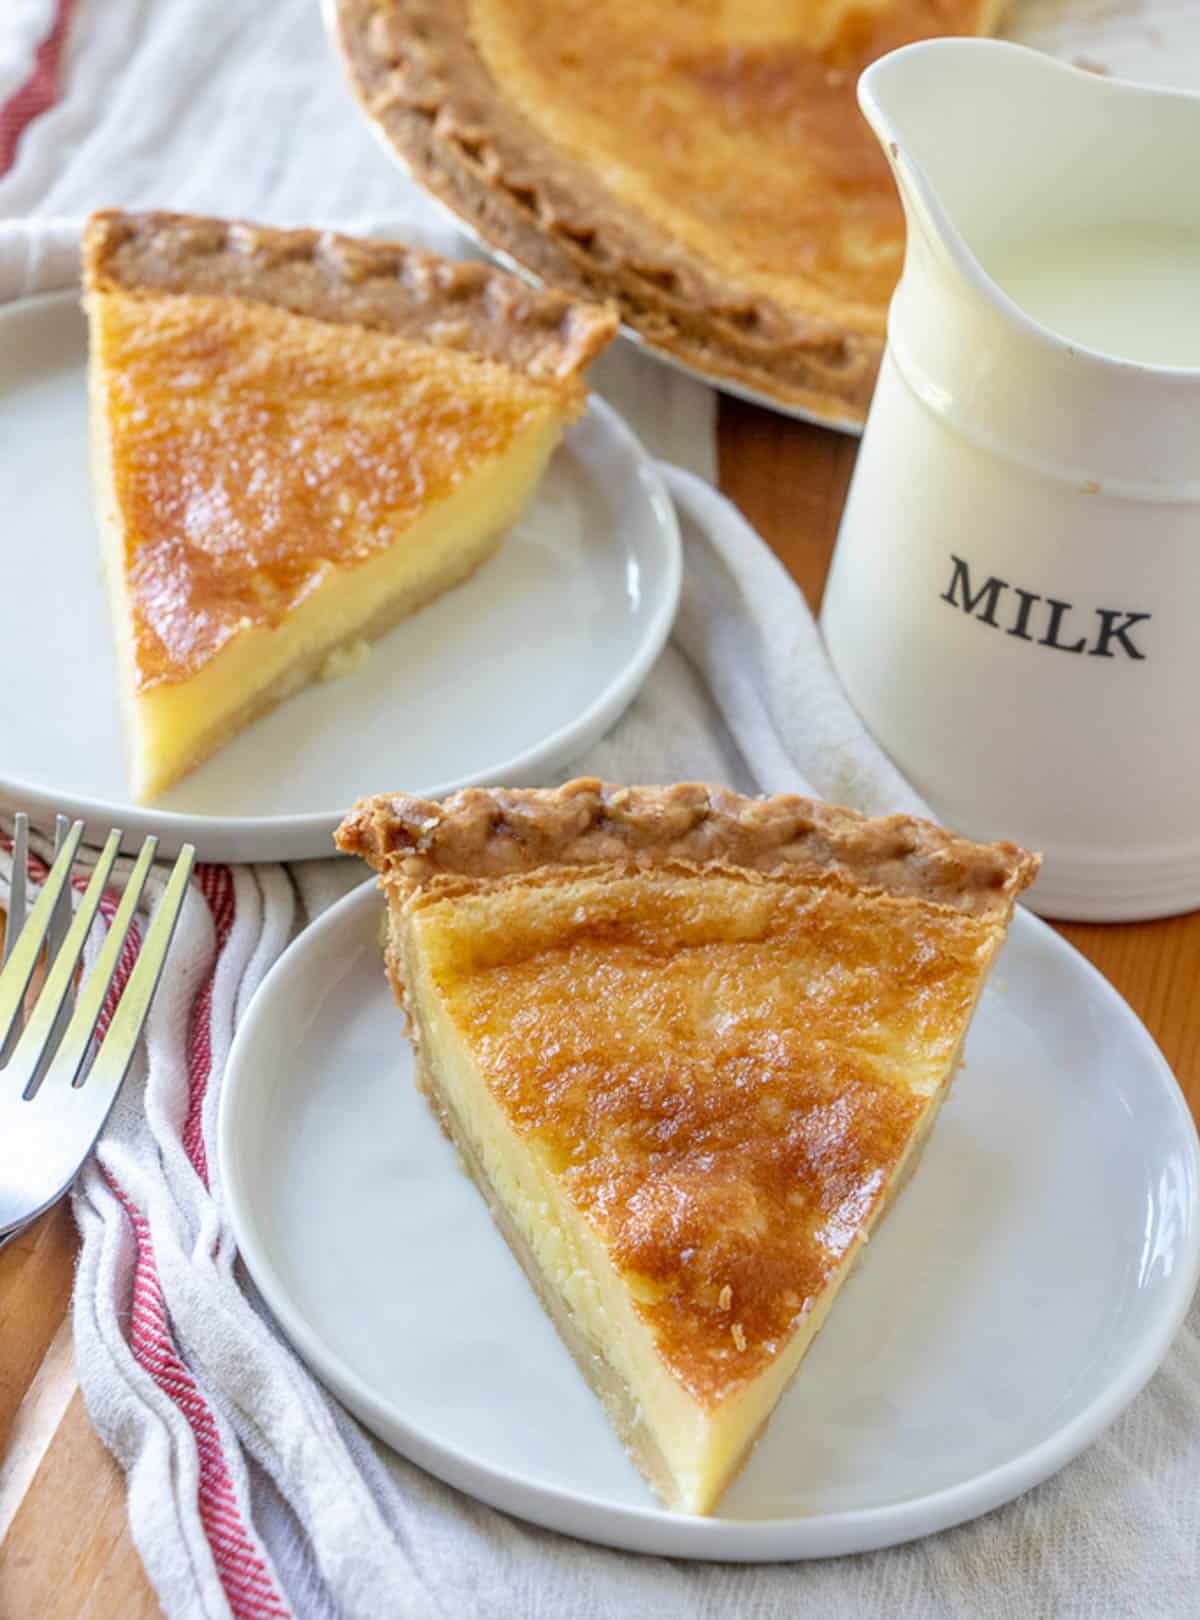 Buttermilk pie on a plate with a white and red napkin